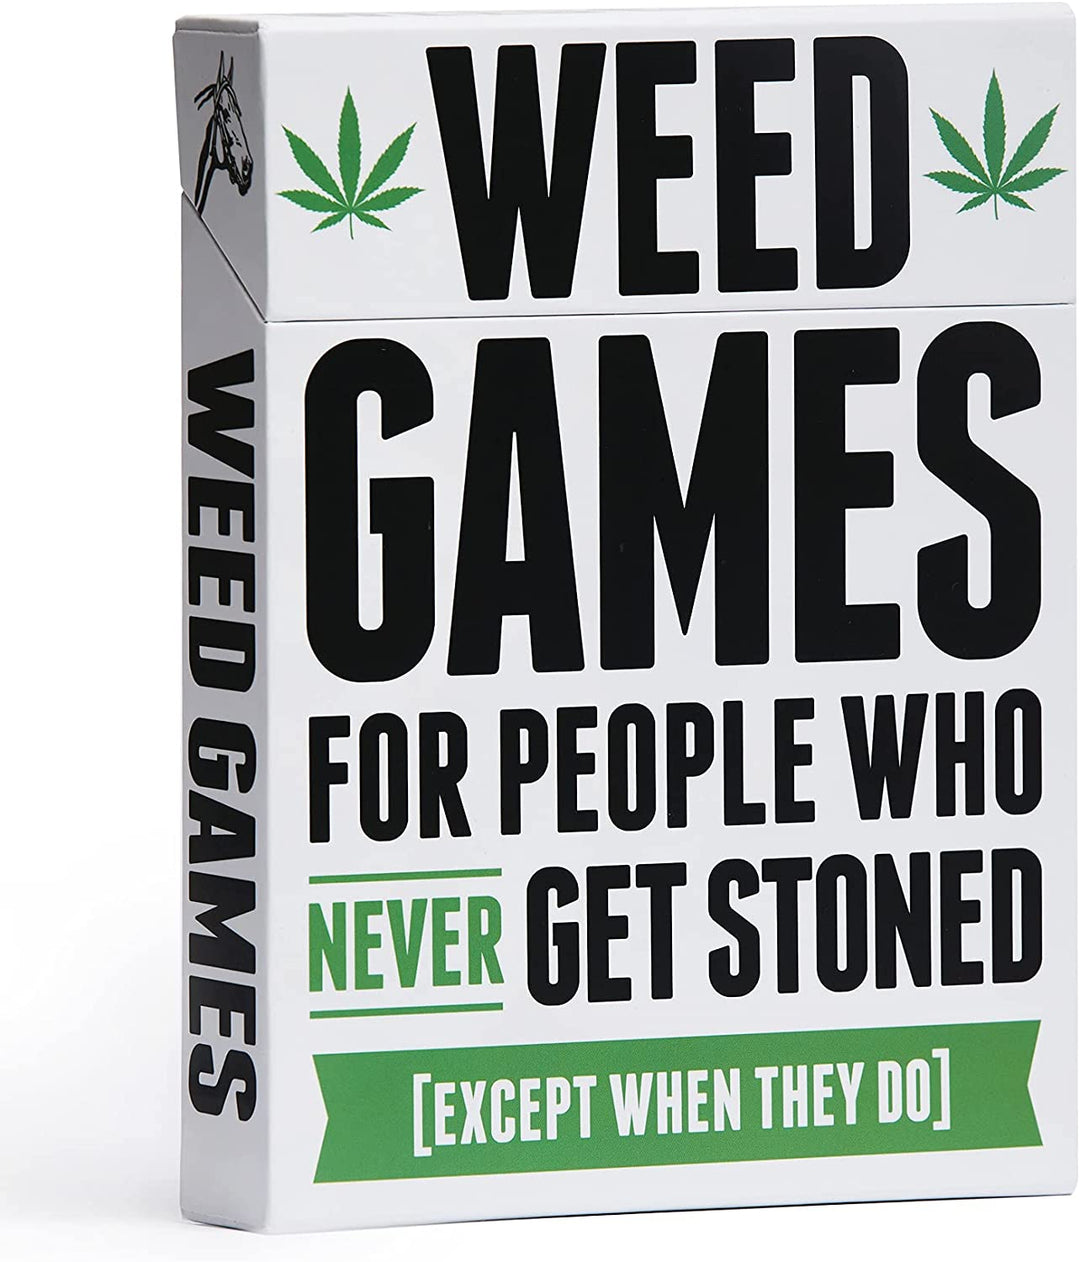 Weed Games For People Who Never Get Stoned [Except When They Do]